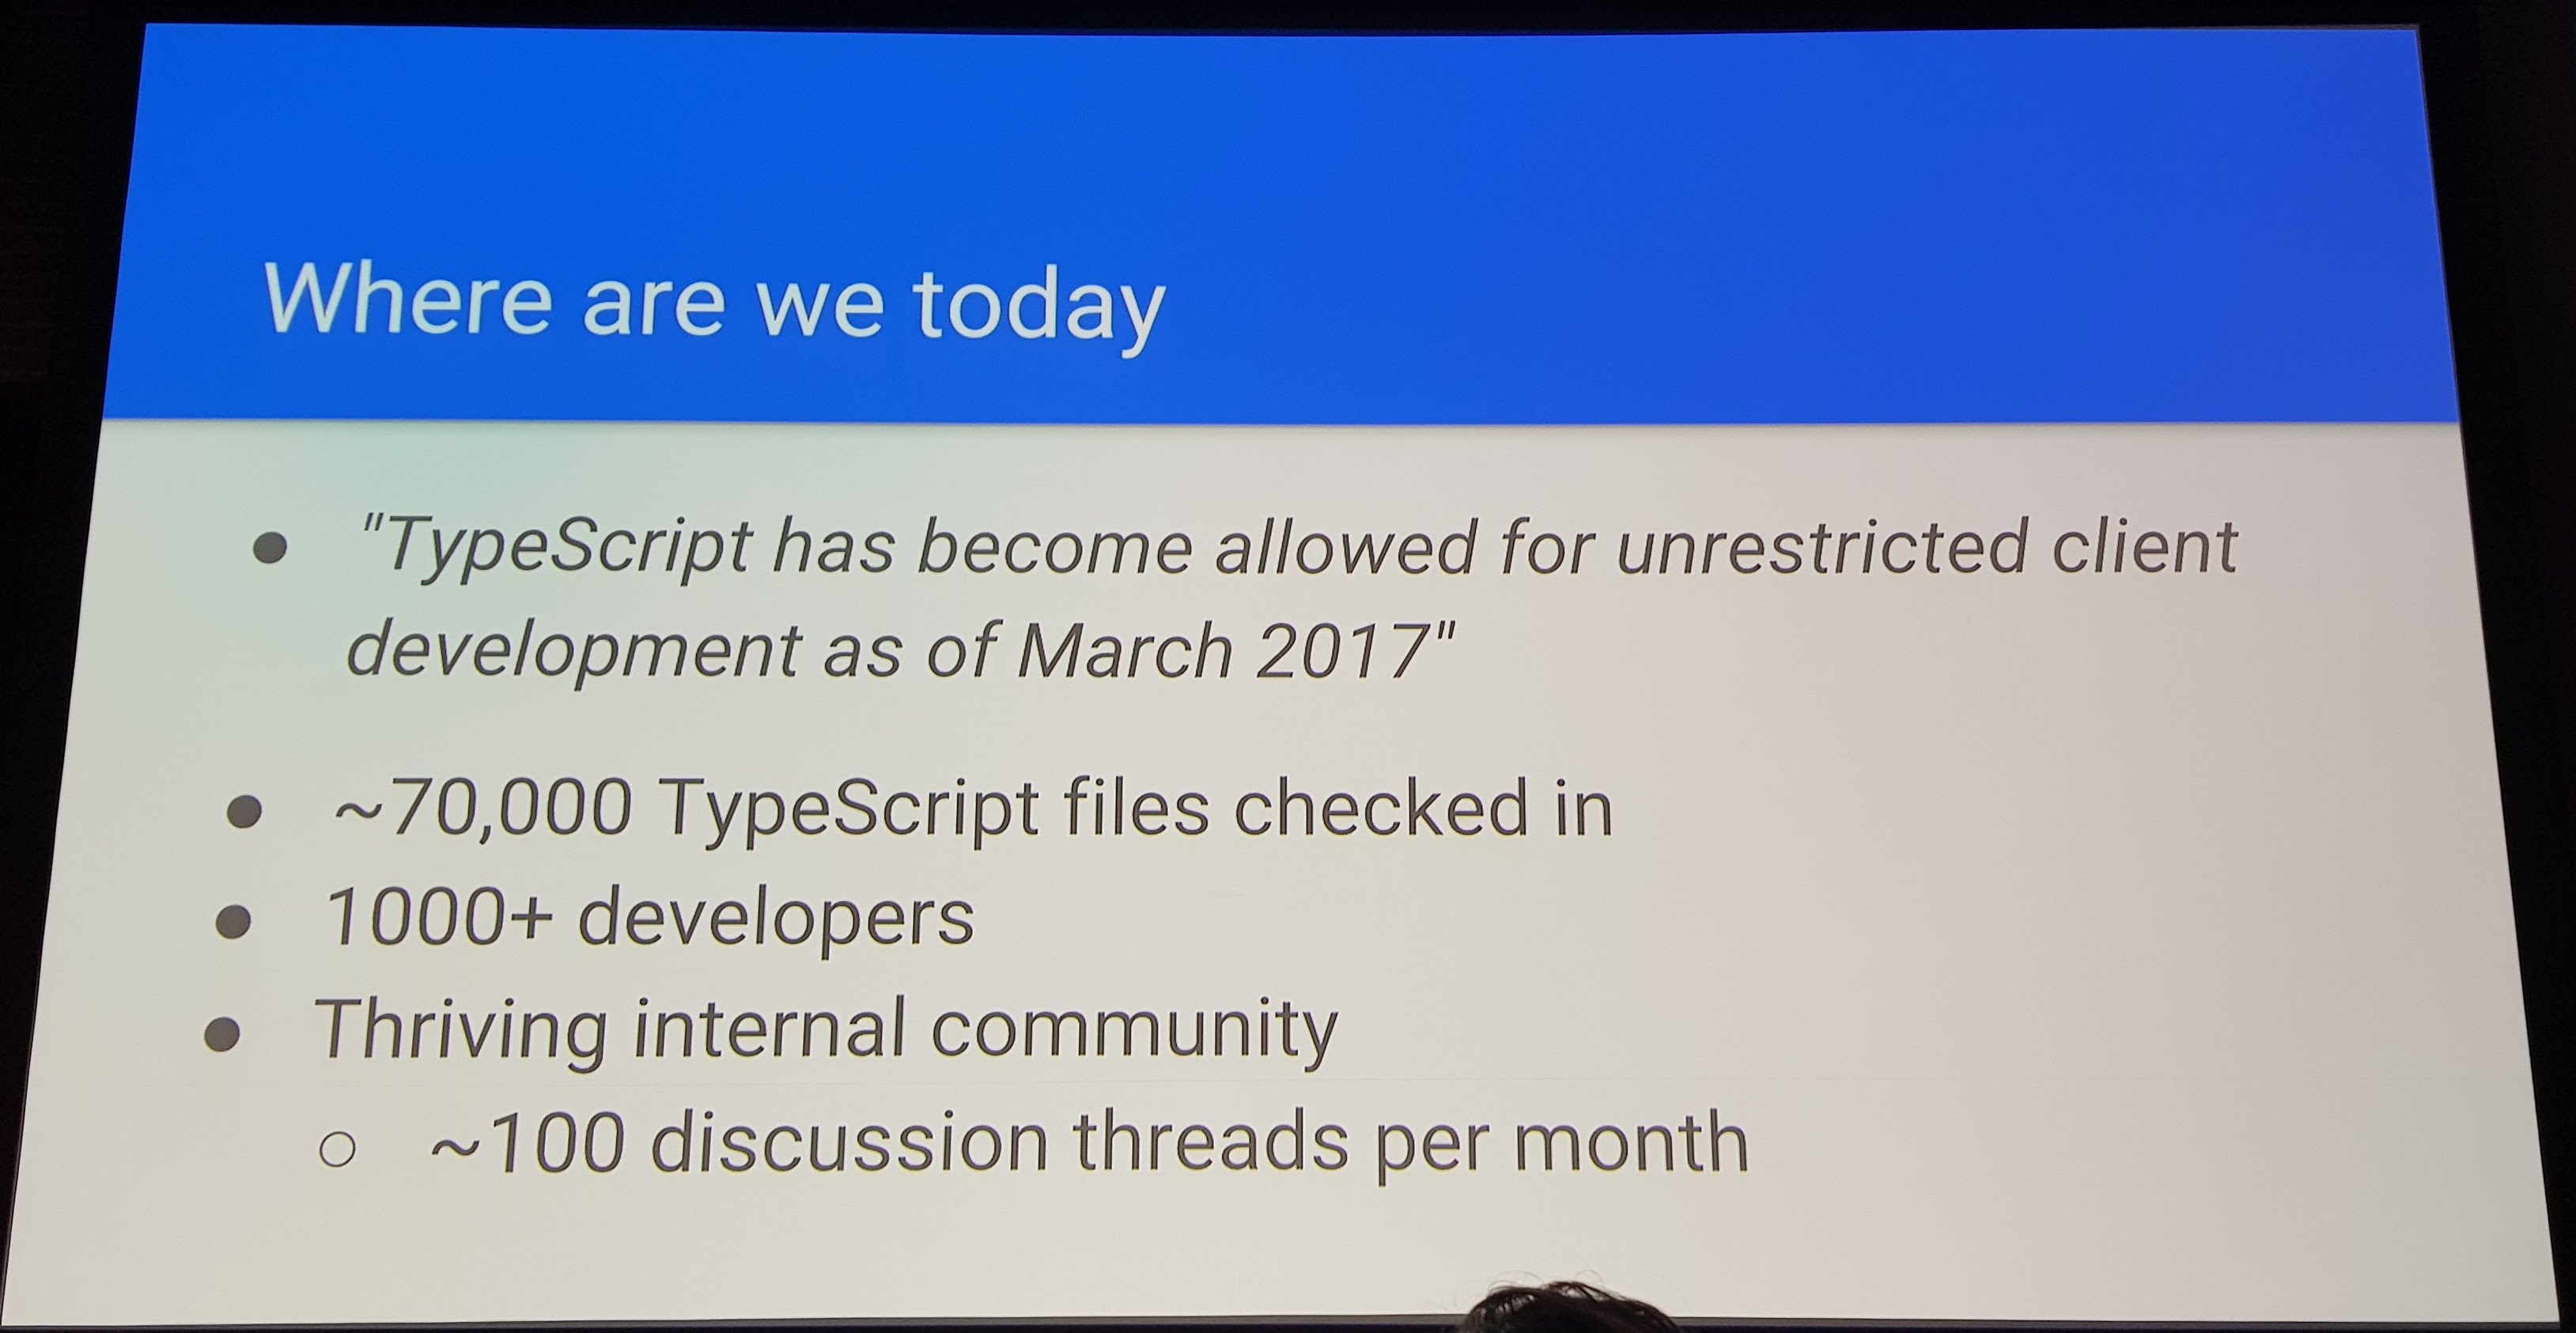 A slide showing the current usage of TypeScript at Google